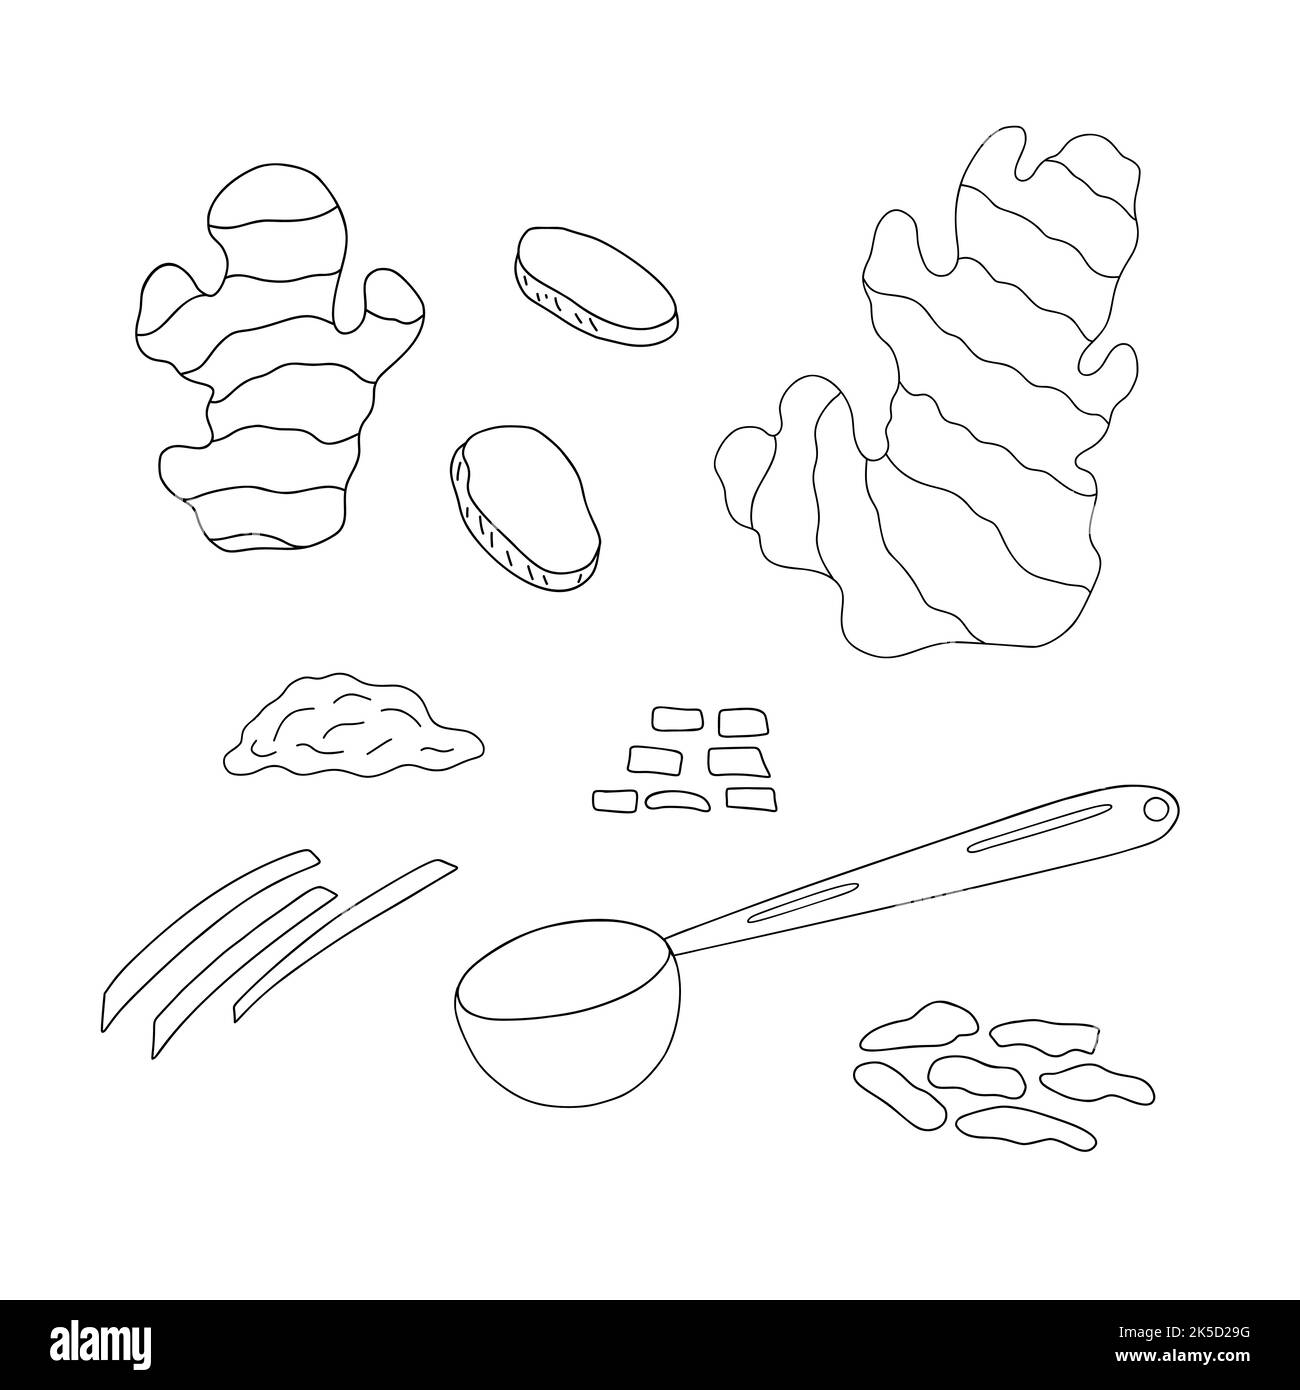 Ginger root, whole, slices and powder in spoon set simple outline vector illustration, Japanese traditional spice culinary ingredient Stock Vector